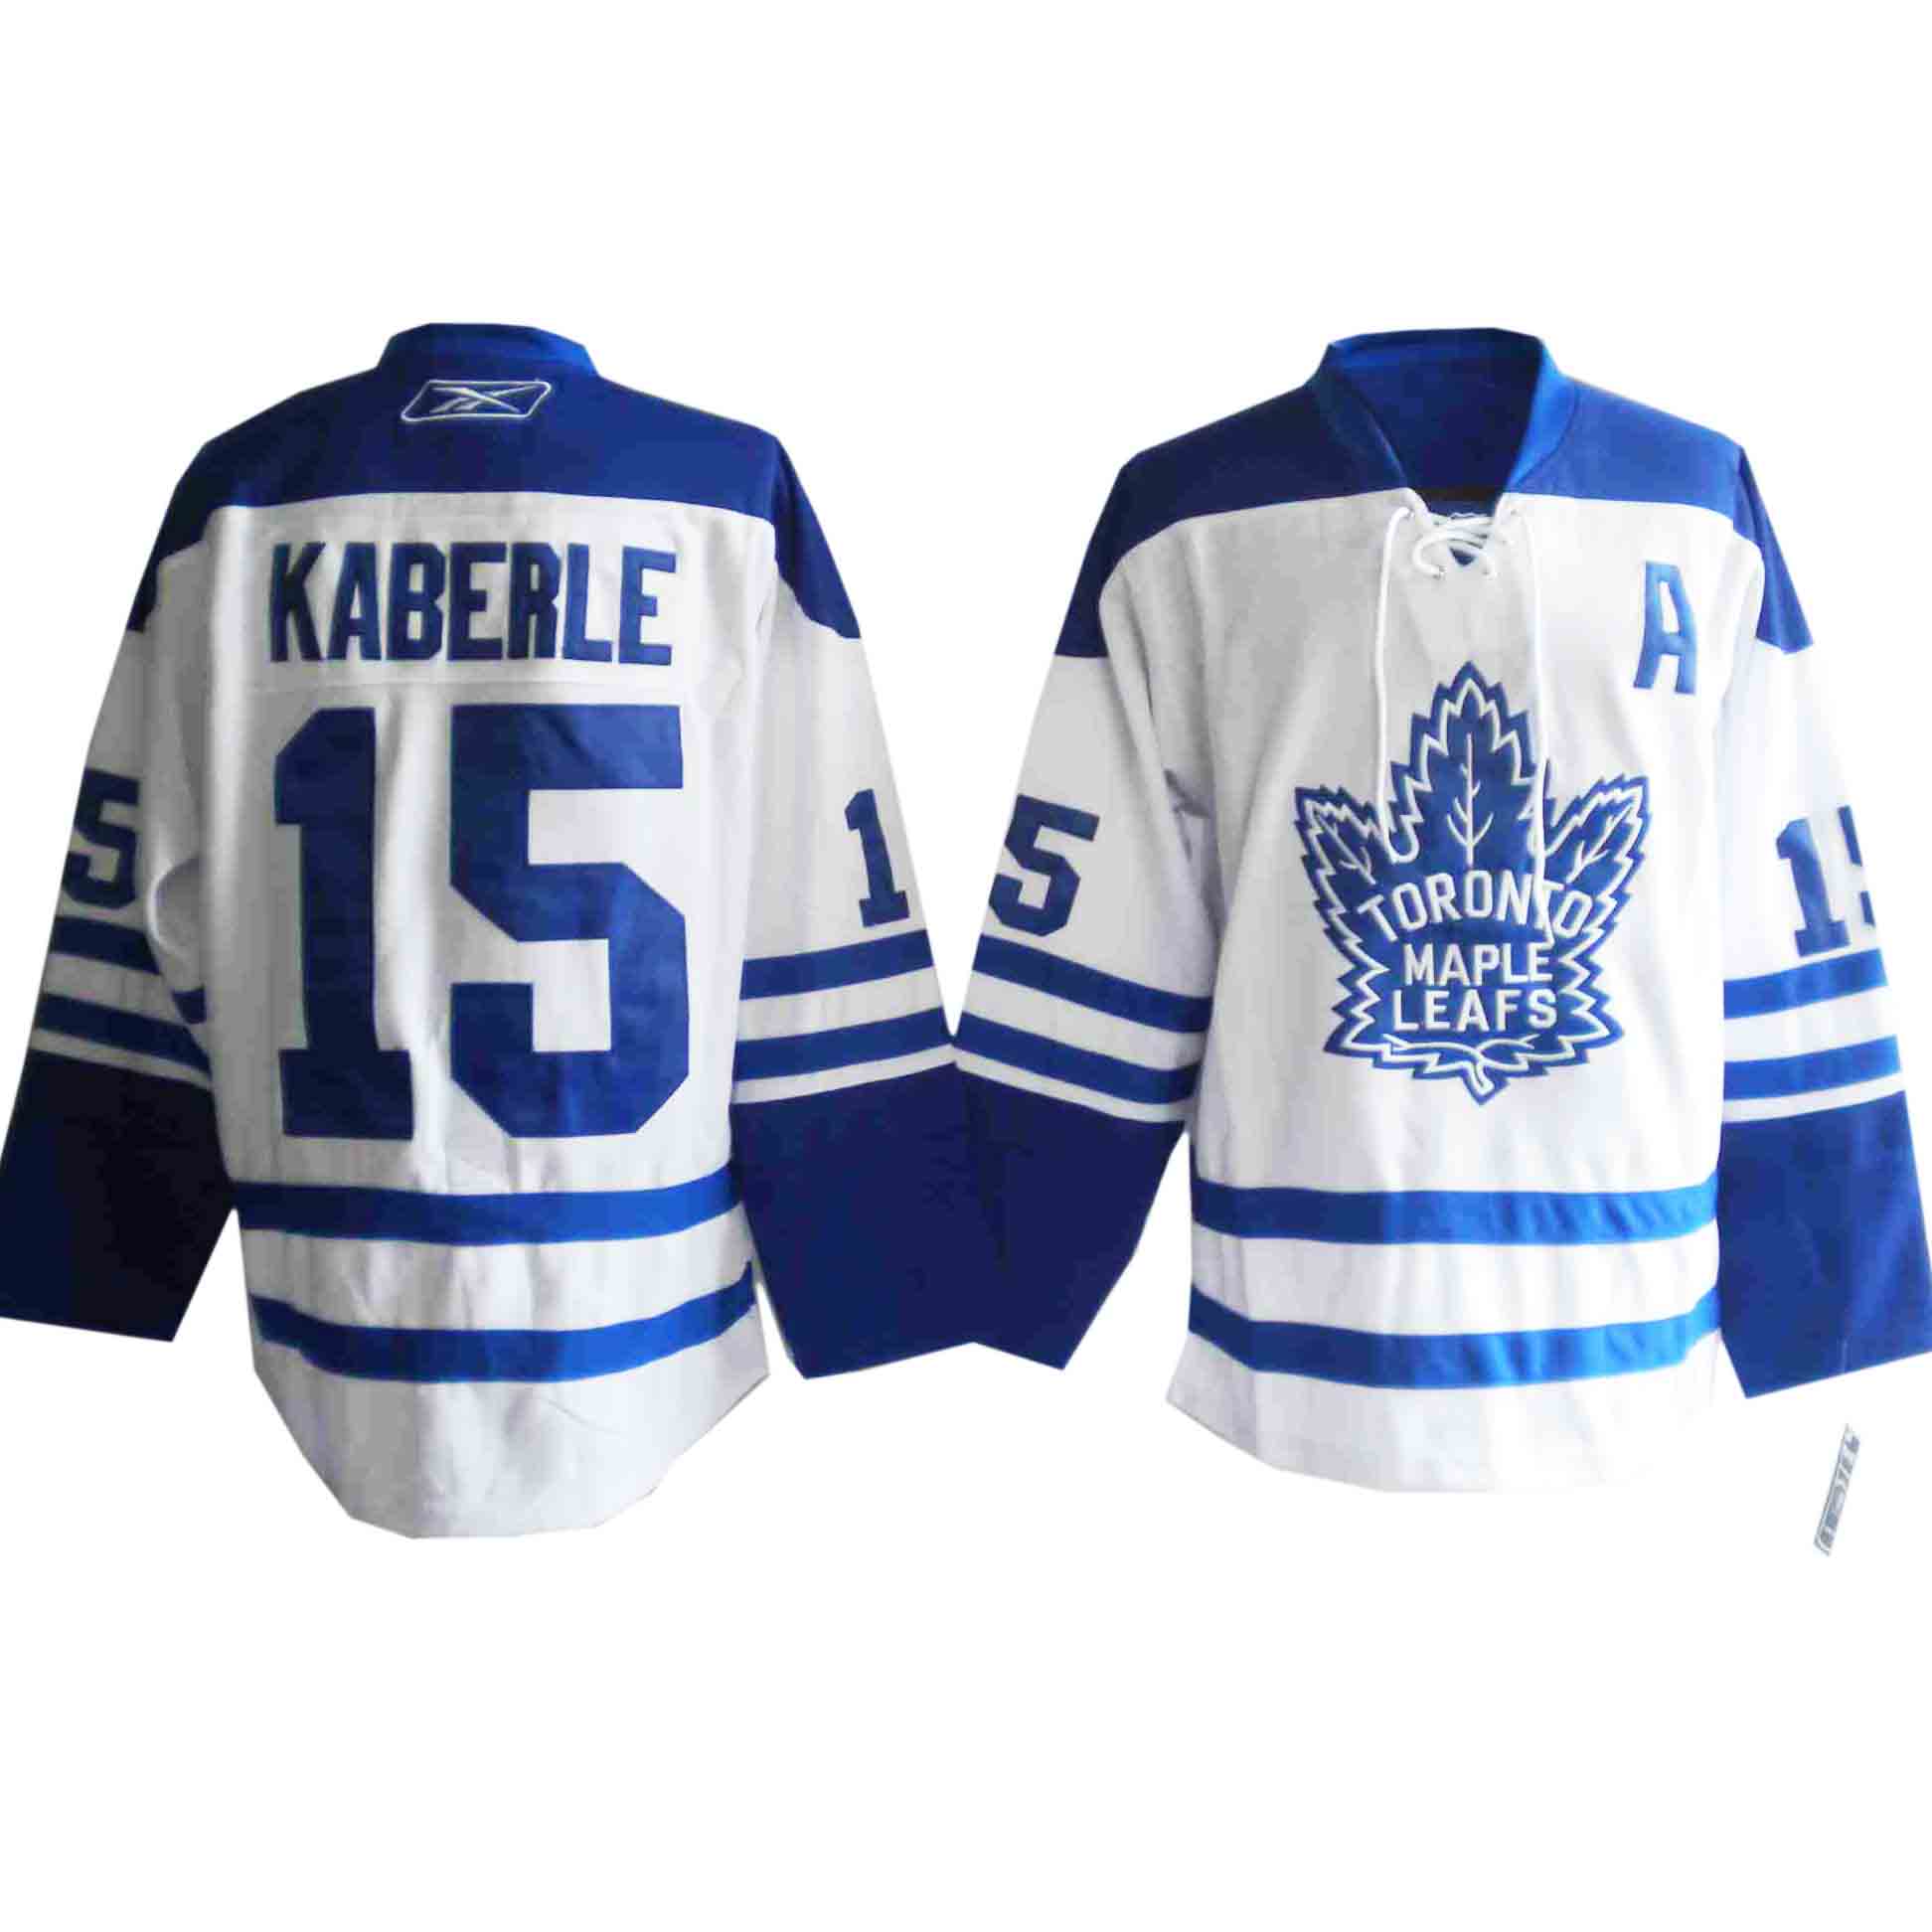 NHL Toronto Maple Leafs #15 Tomas Kaberle Jersey in white